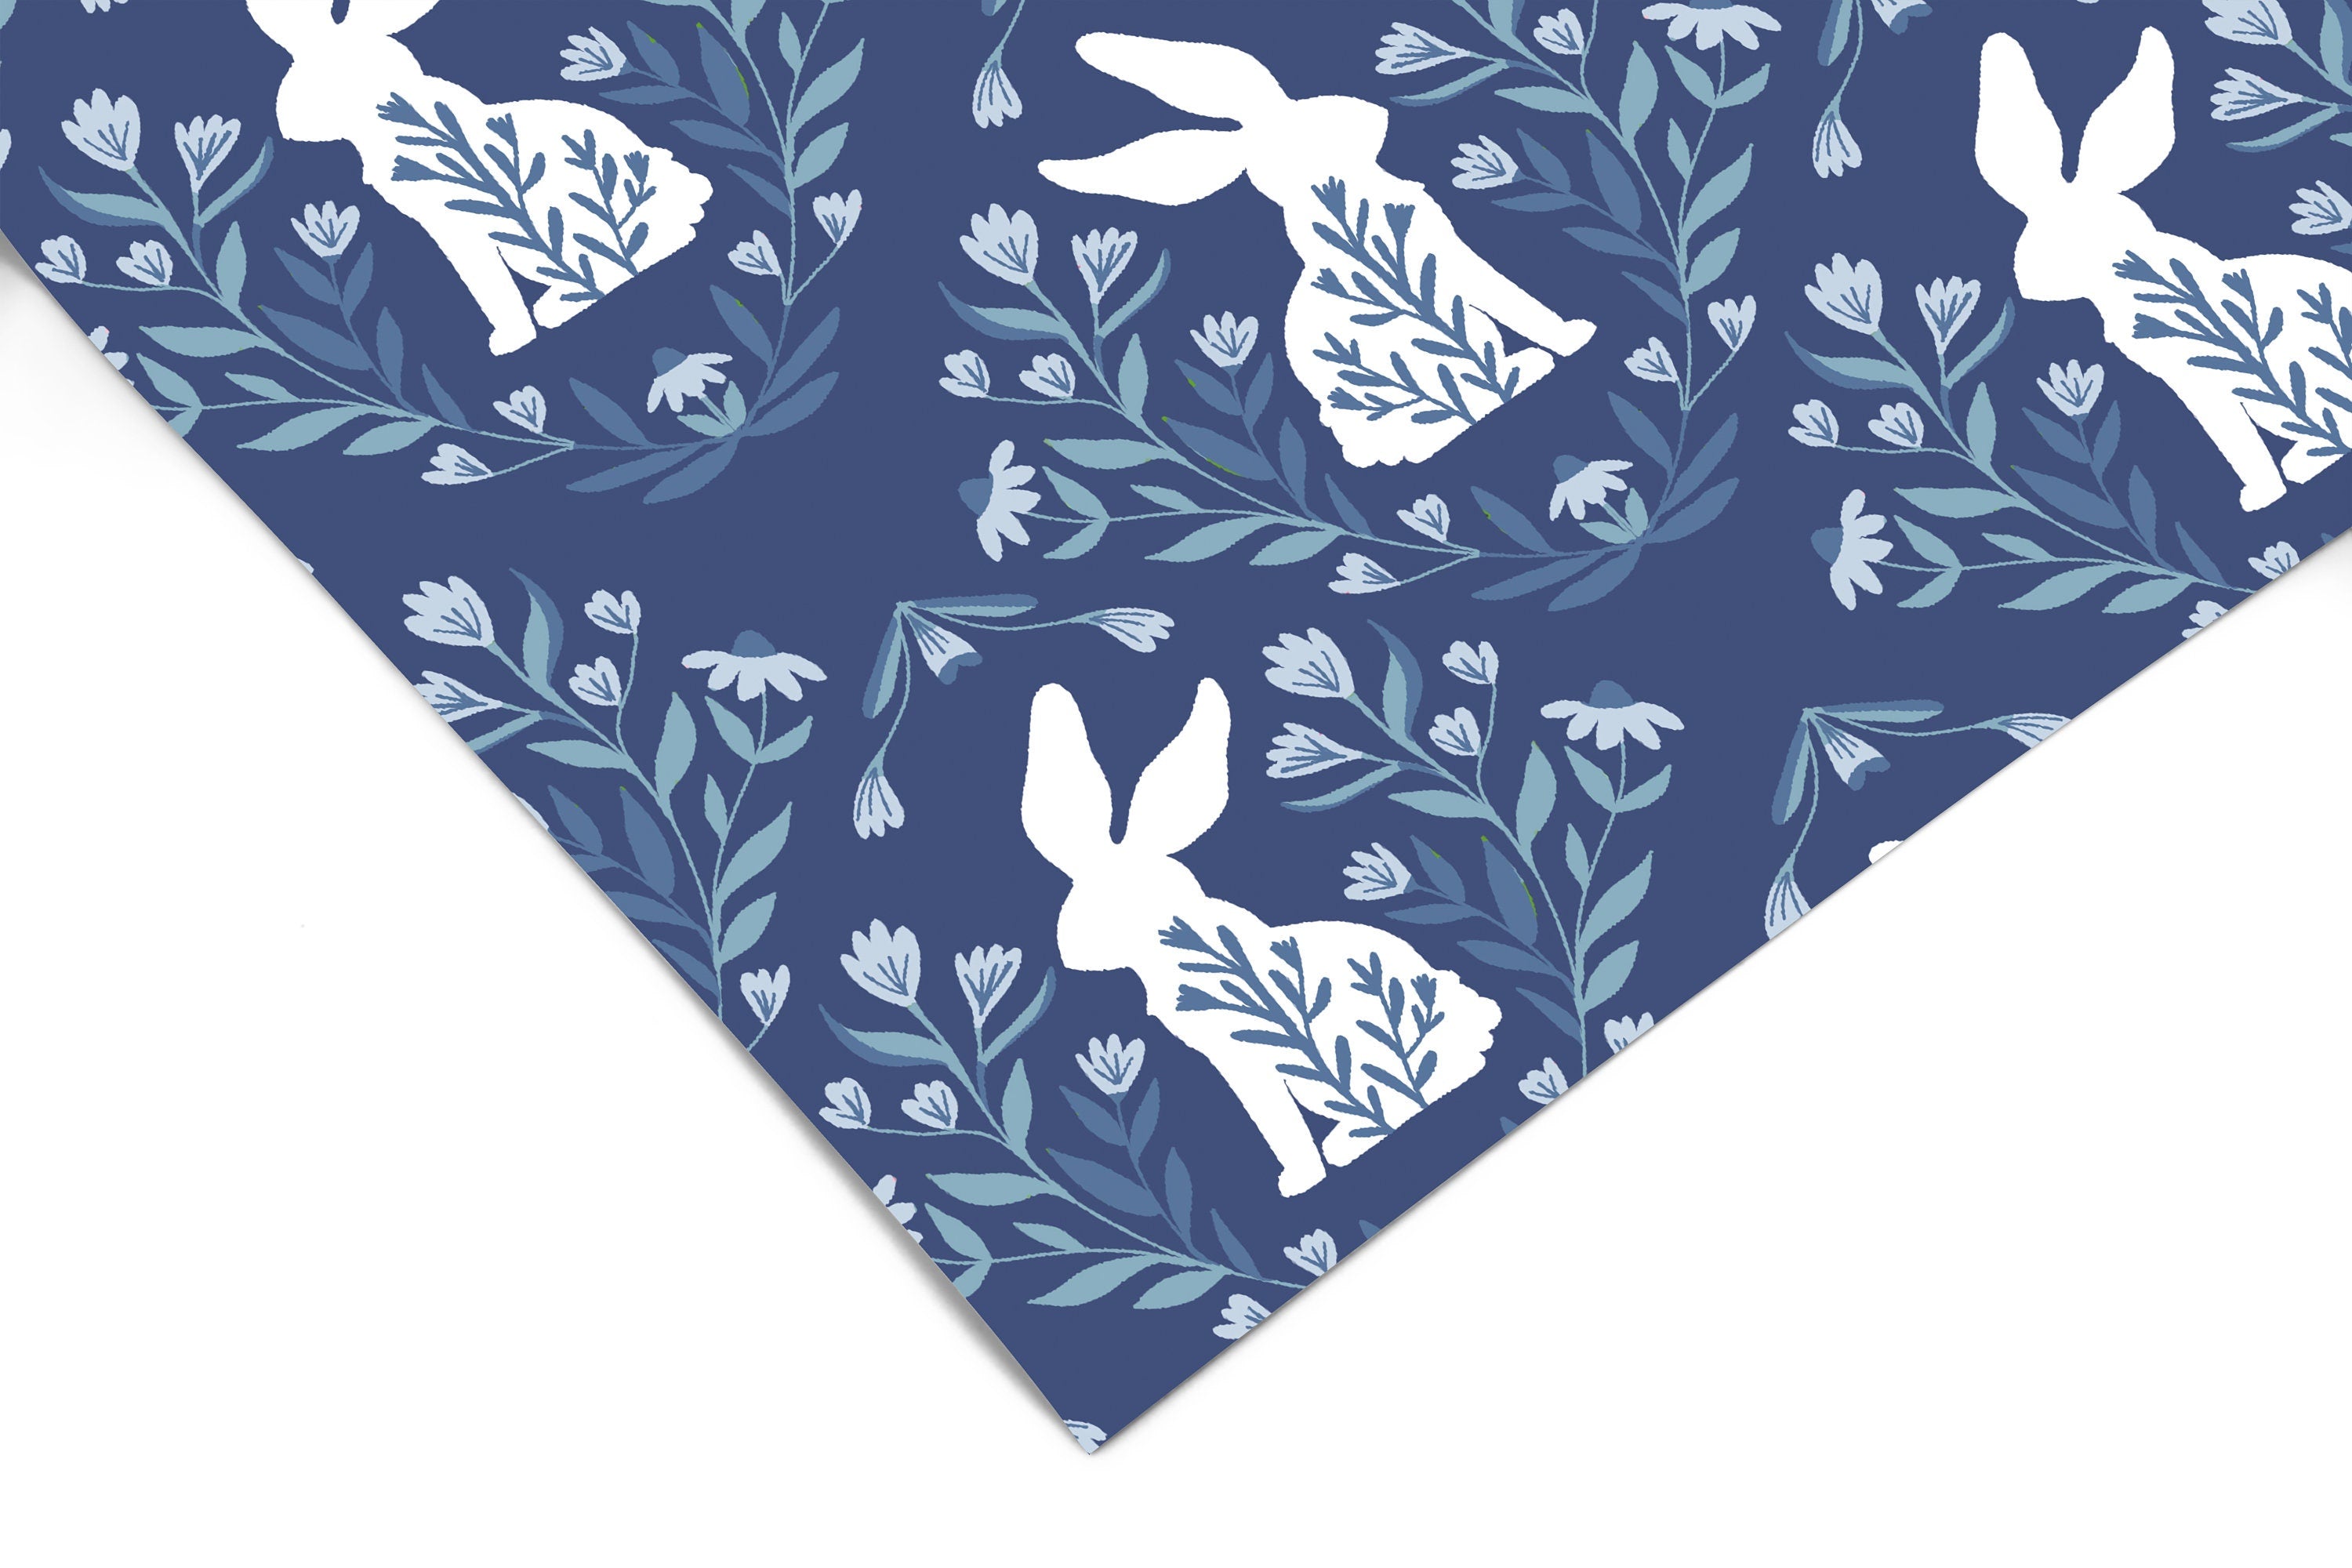 Wallpaper Peel and Stick Wallpaper Blue White Bunnies with Floral Removable Wallpaper Wall Decor Home Decor Wall Art Room Decor 3765 - JamesAndColors